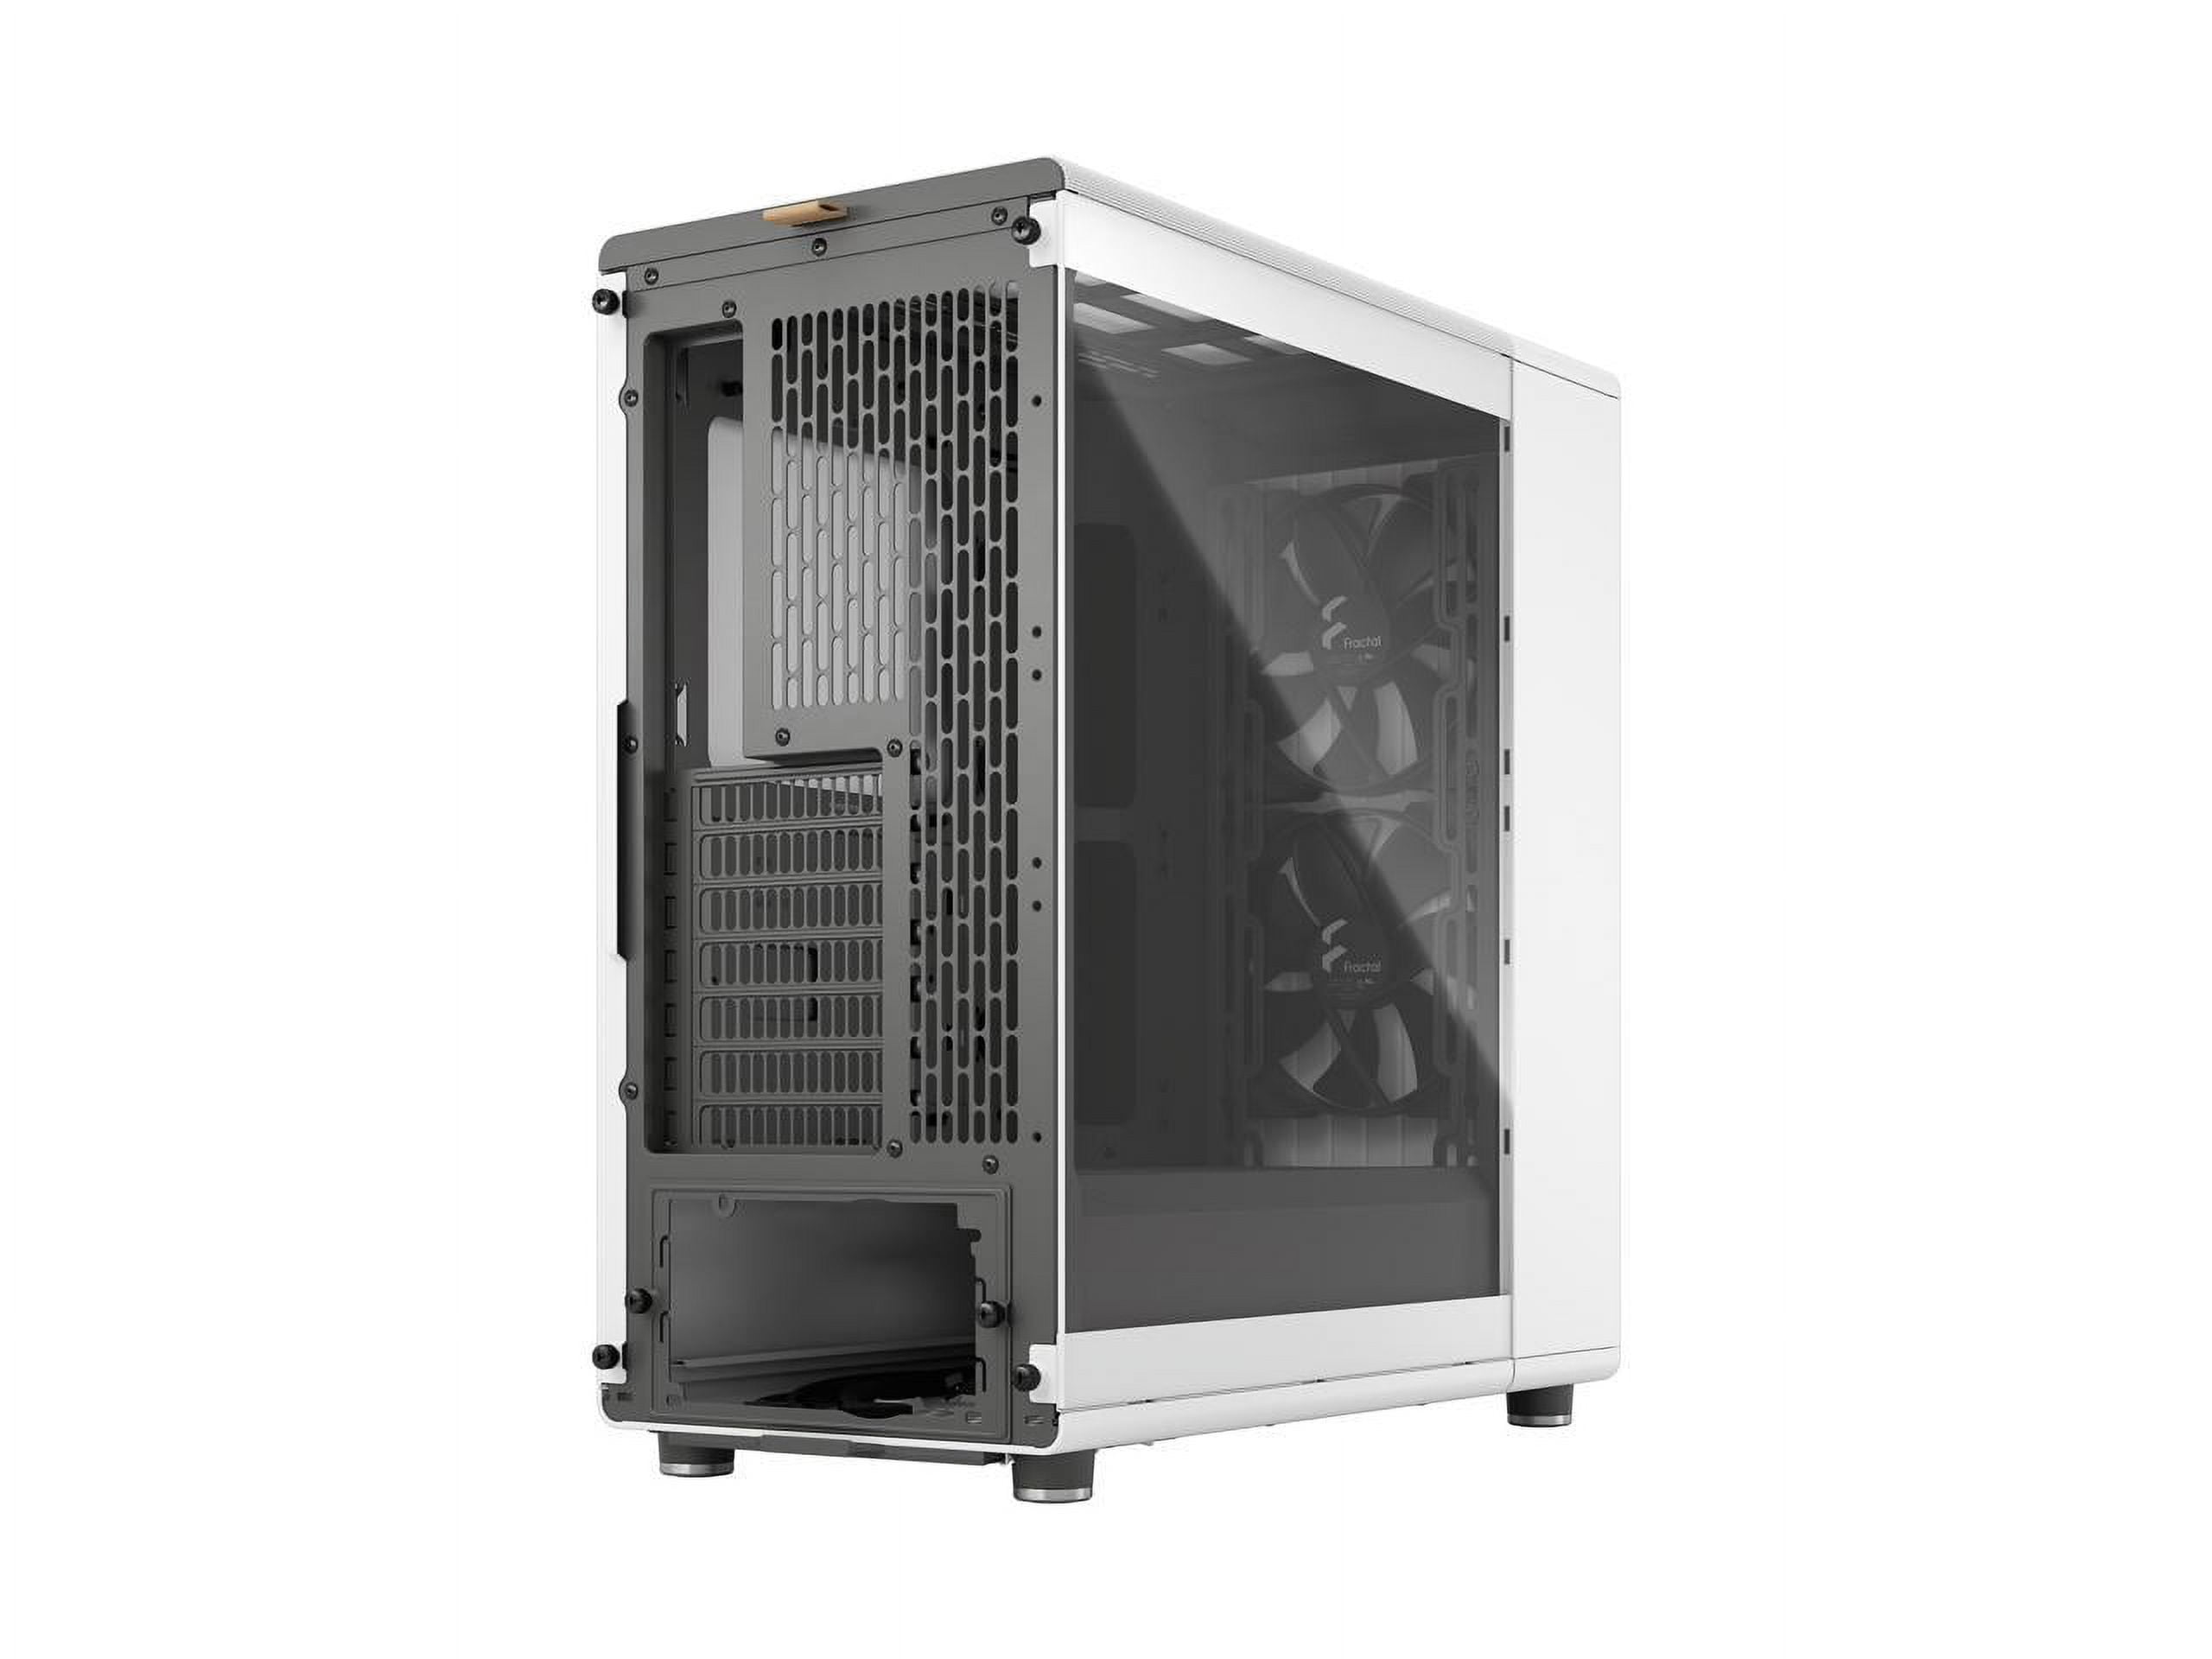 Fractal Design North ATX mATX Mid Tower PC Chassis with Walnut Front and  Tempered Glass Window Side Panel - Chalk White FD-C-NOR1C-04